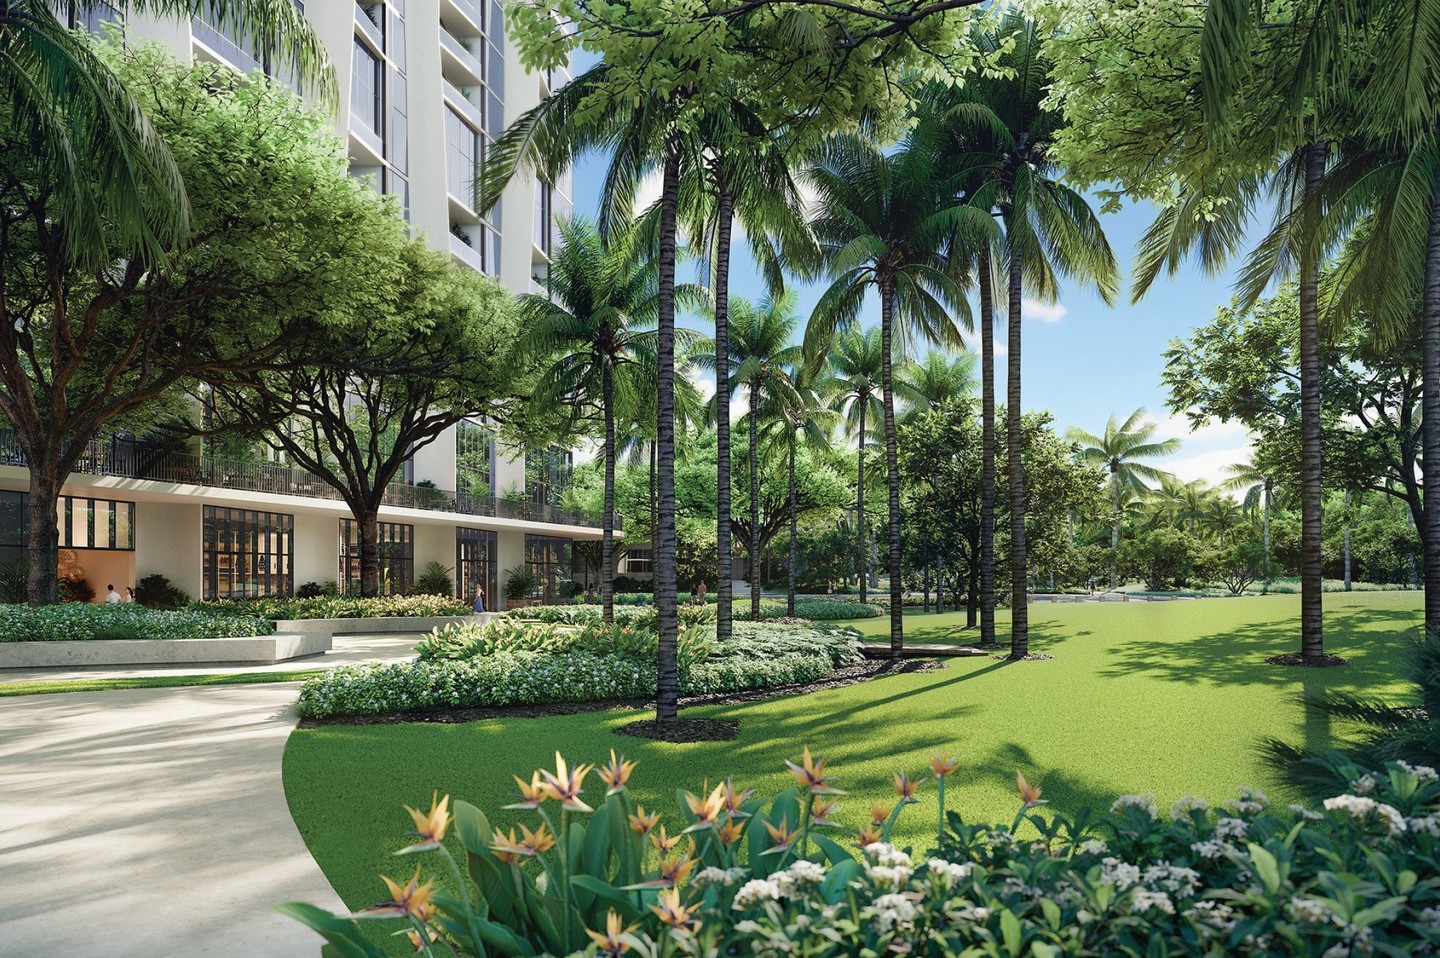 Thanks to the enthusiasm and support of our community, we experienced strong sales in the beginning of 2022 including Ulana, our newest reserved housing project. Pacific Business News reports that Ulana is approximately 83% sold. ‘A‘ali‘i is 92.7% sold, and Kōʻula and Victoria Place are at 91.5% and 99.7% pre-sold, respectively, at the end of the first quarter. And at 88.6% pre-sold, The Park Ward Village is expected to begin construction in the second half of 2022. Read more in the link in our bio.